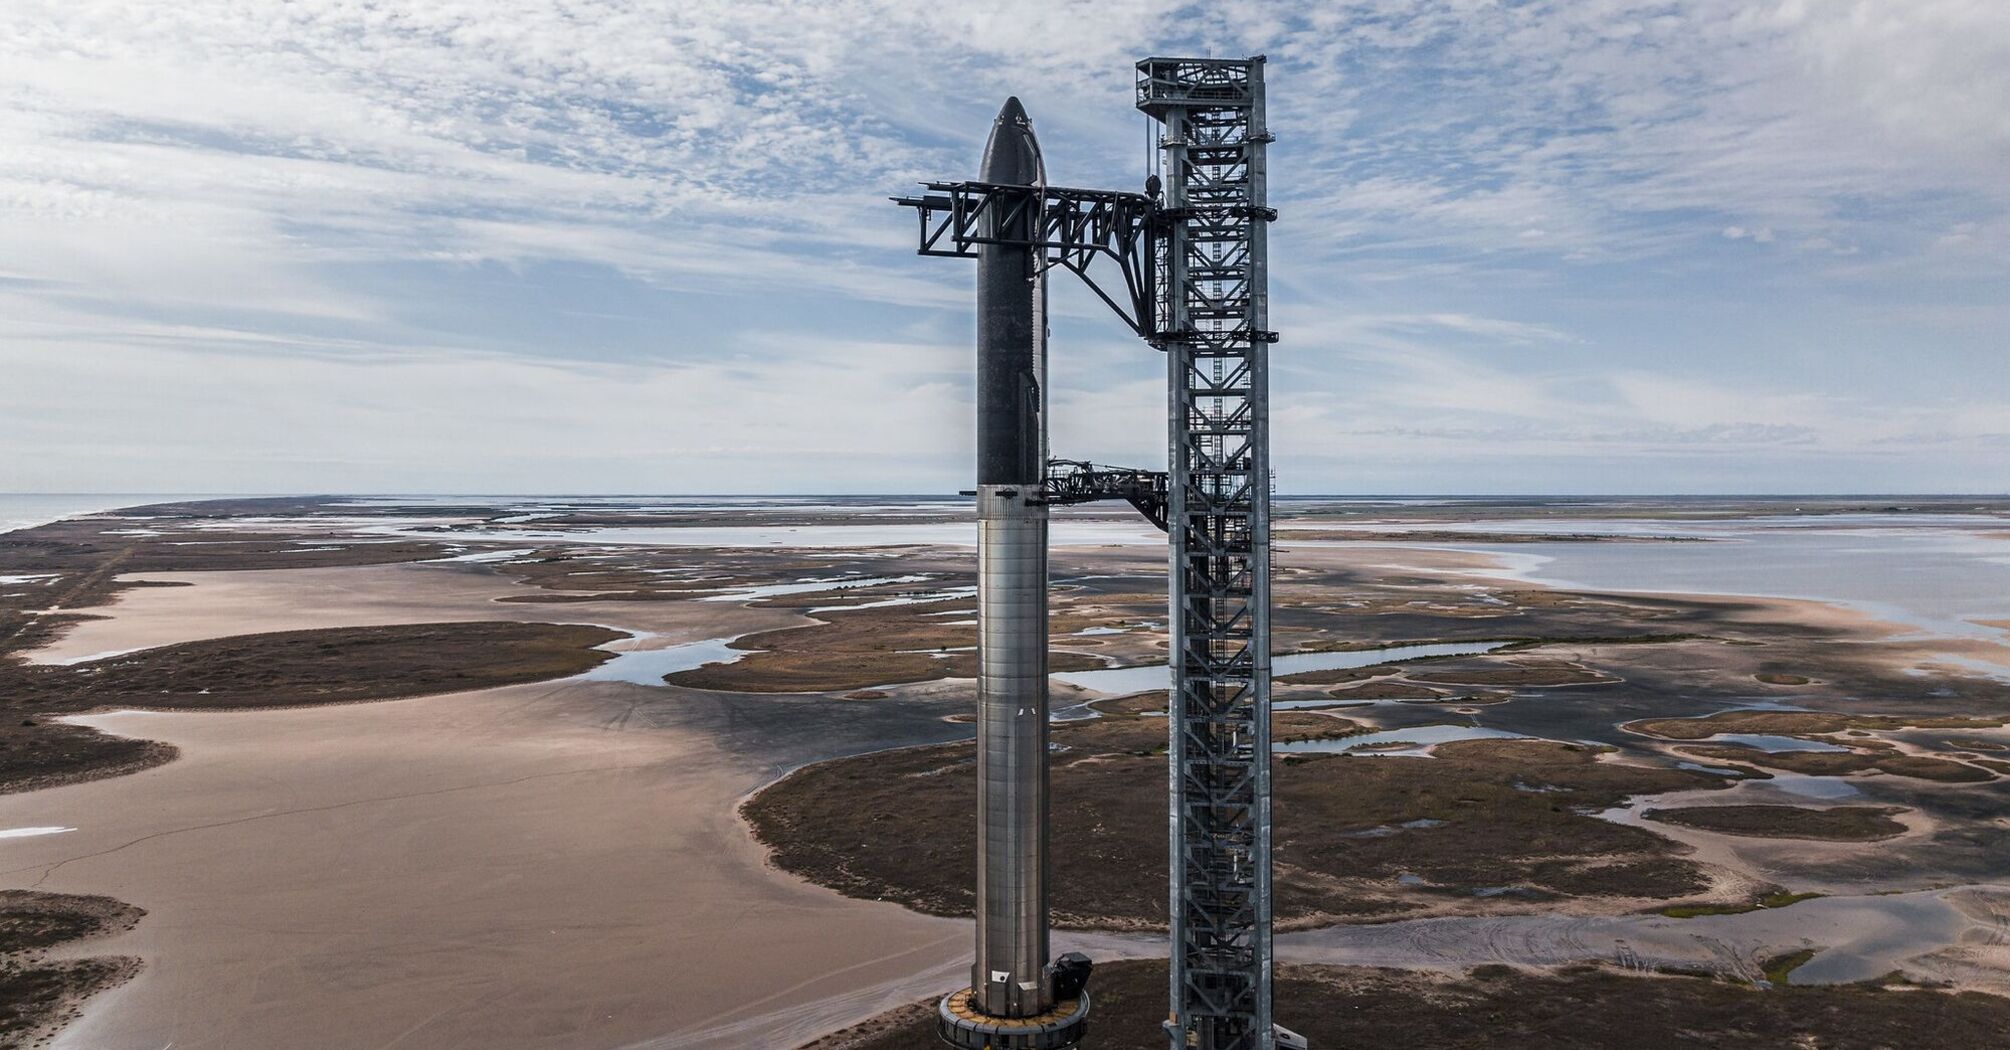 SpaceX's super-heavy starship: the company initiated tests